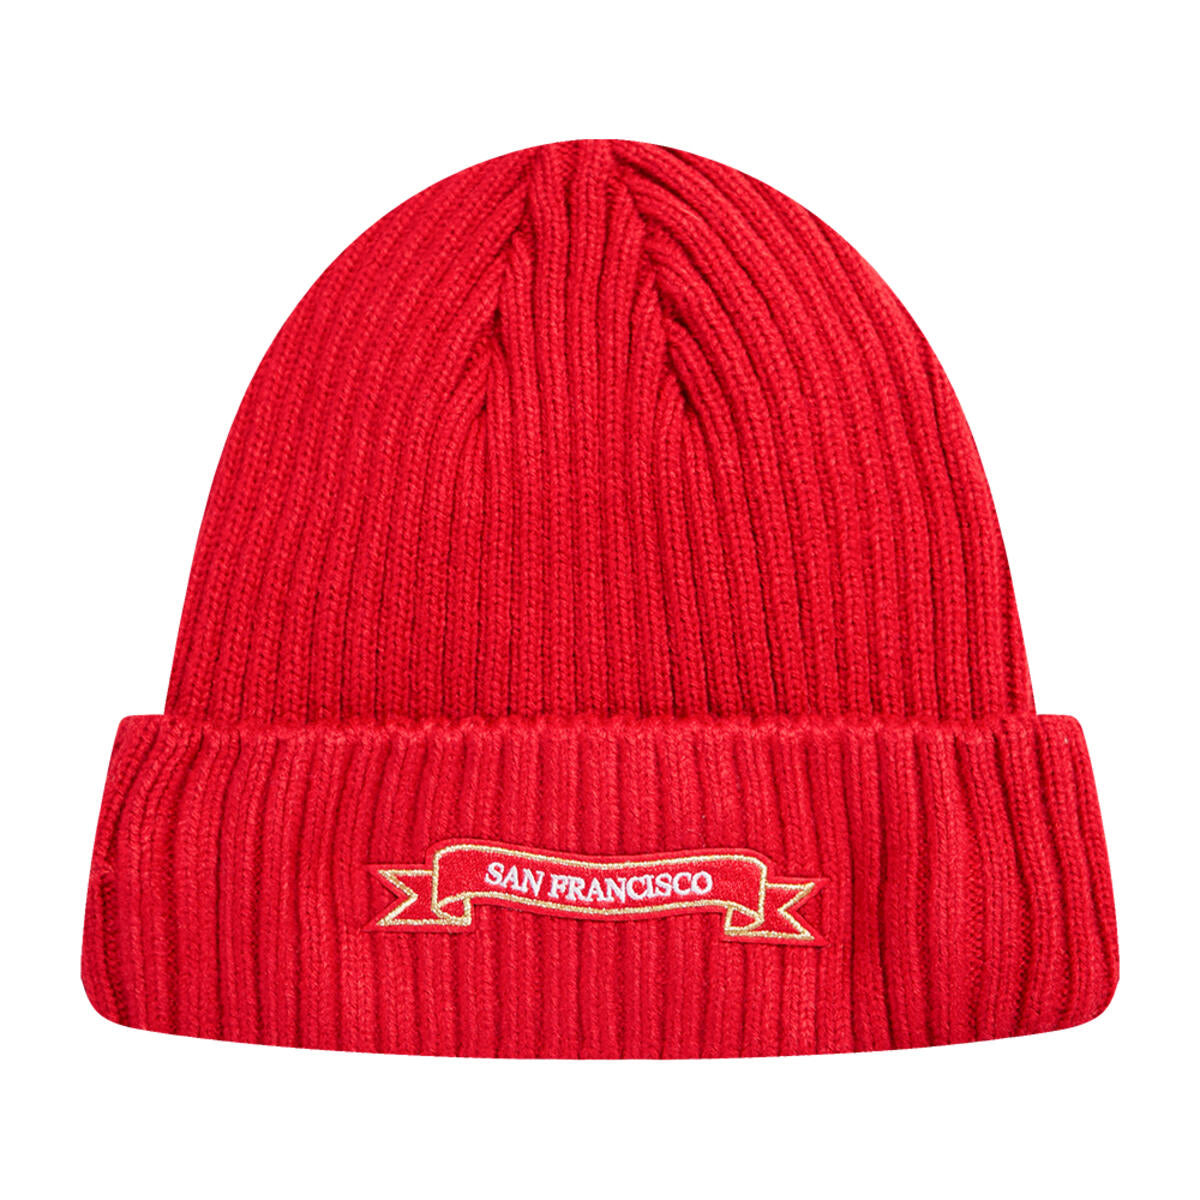 Pro Standard San Francisco 49ers Pro Prep Knit Beanie - Red (FS4748140-RED)